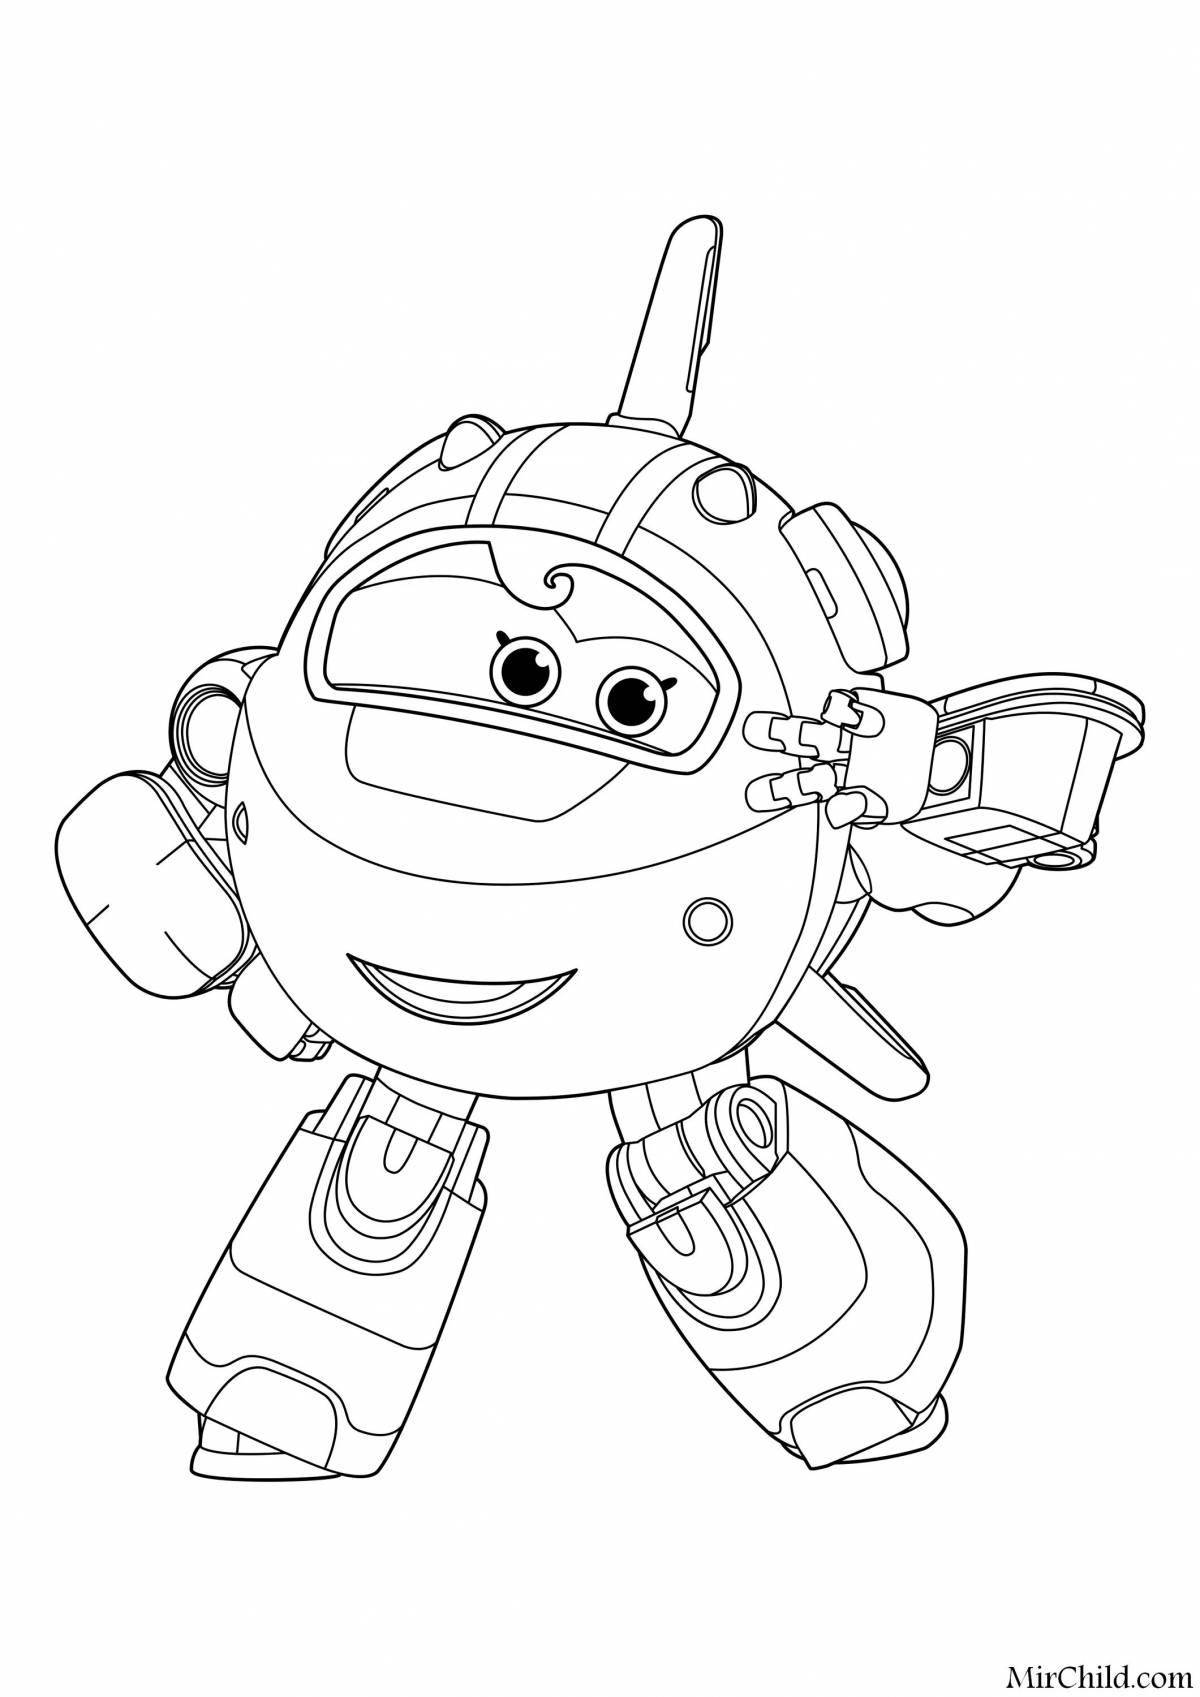 Funny coloring book superwings jet and his friends